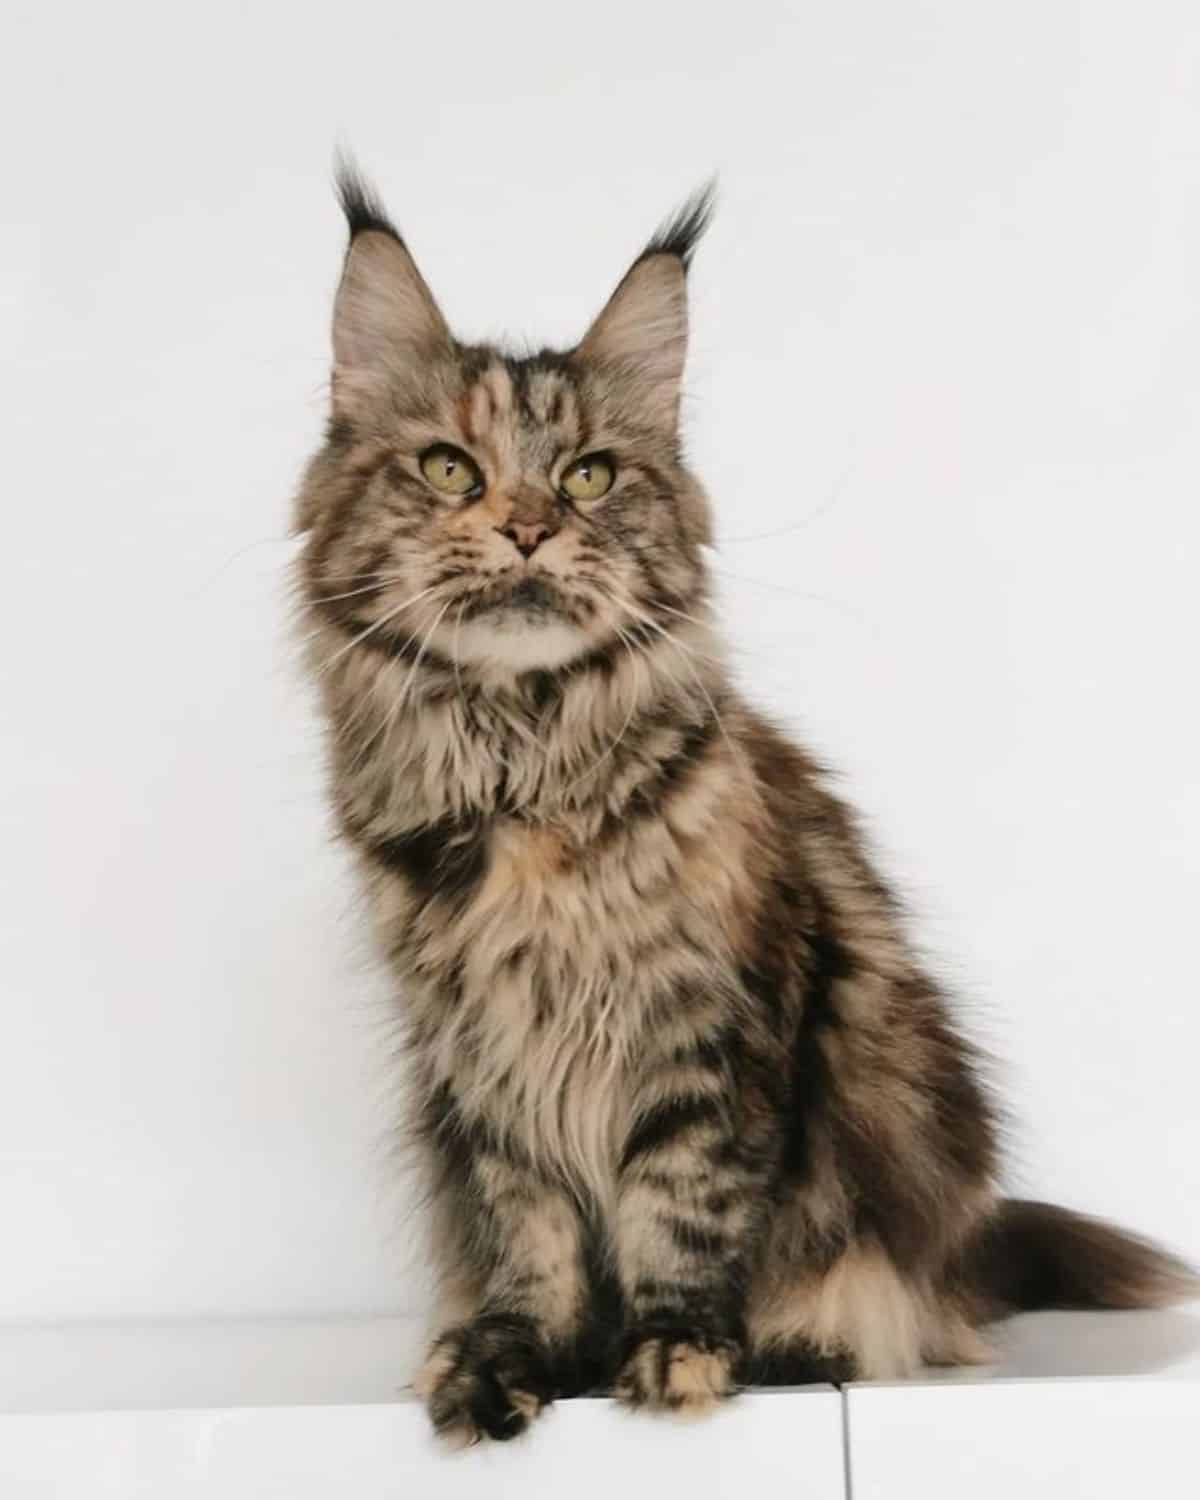 A fluffy tabby maine coon sitting on the edge of a wall.